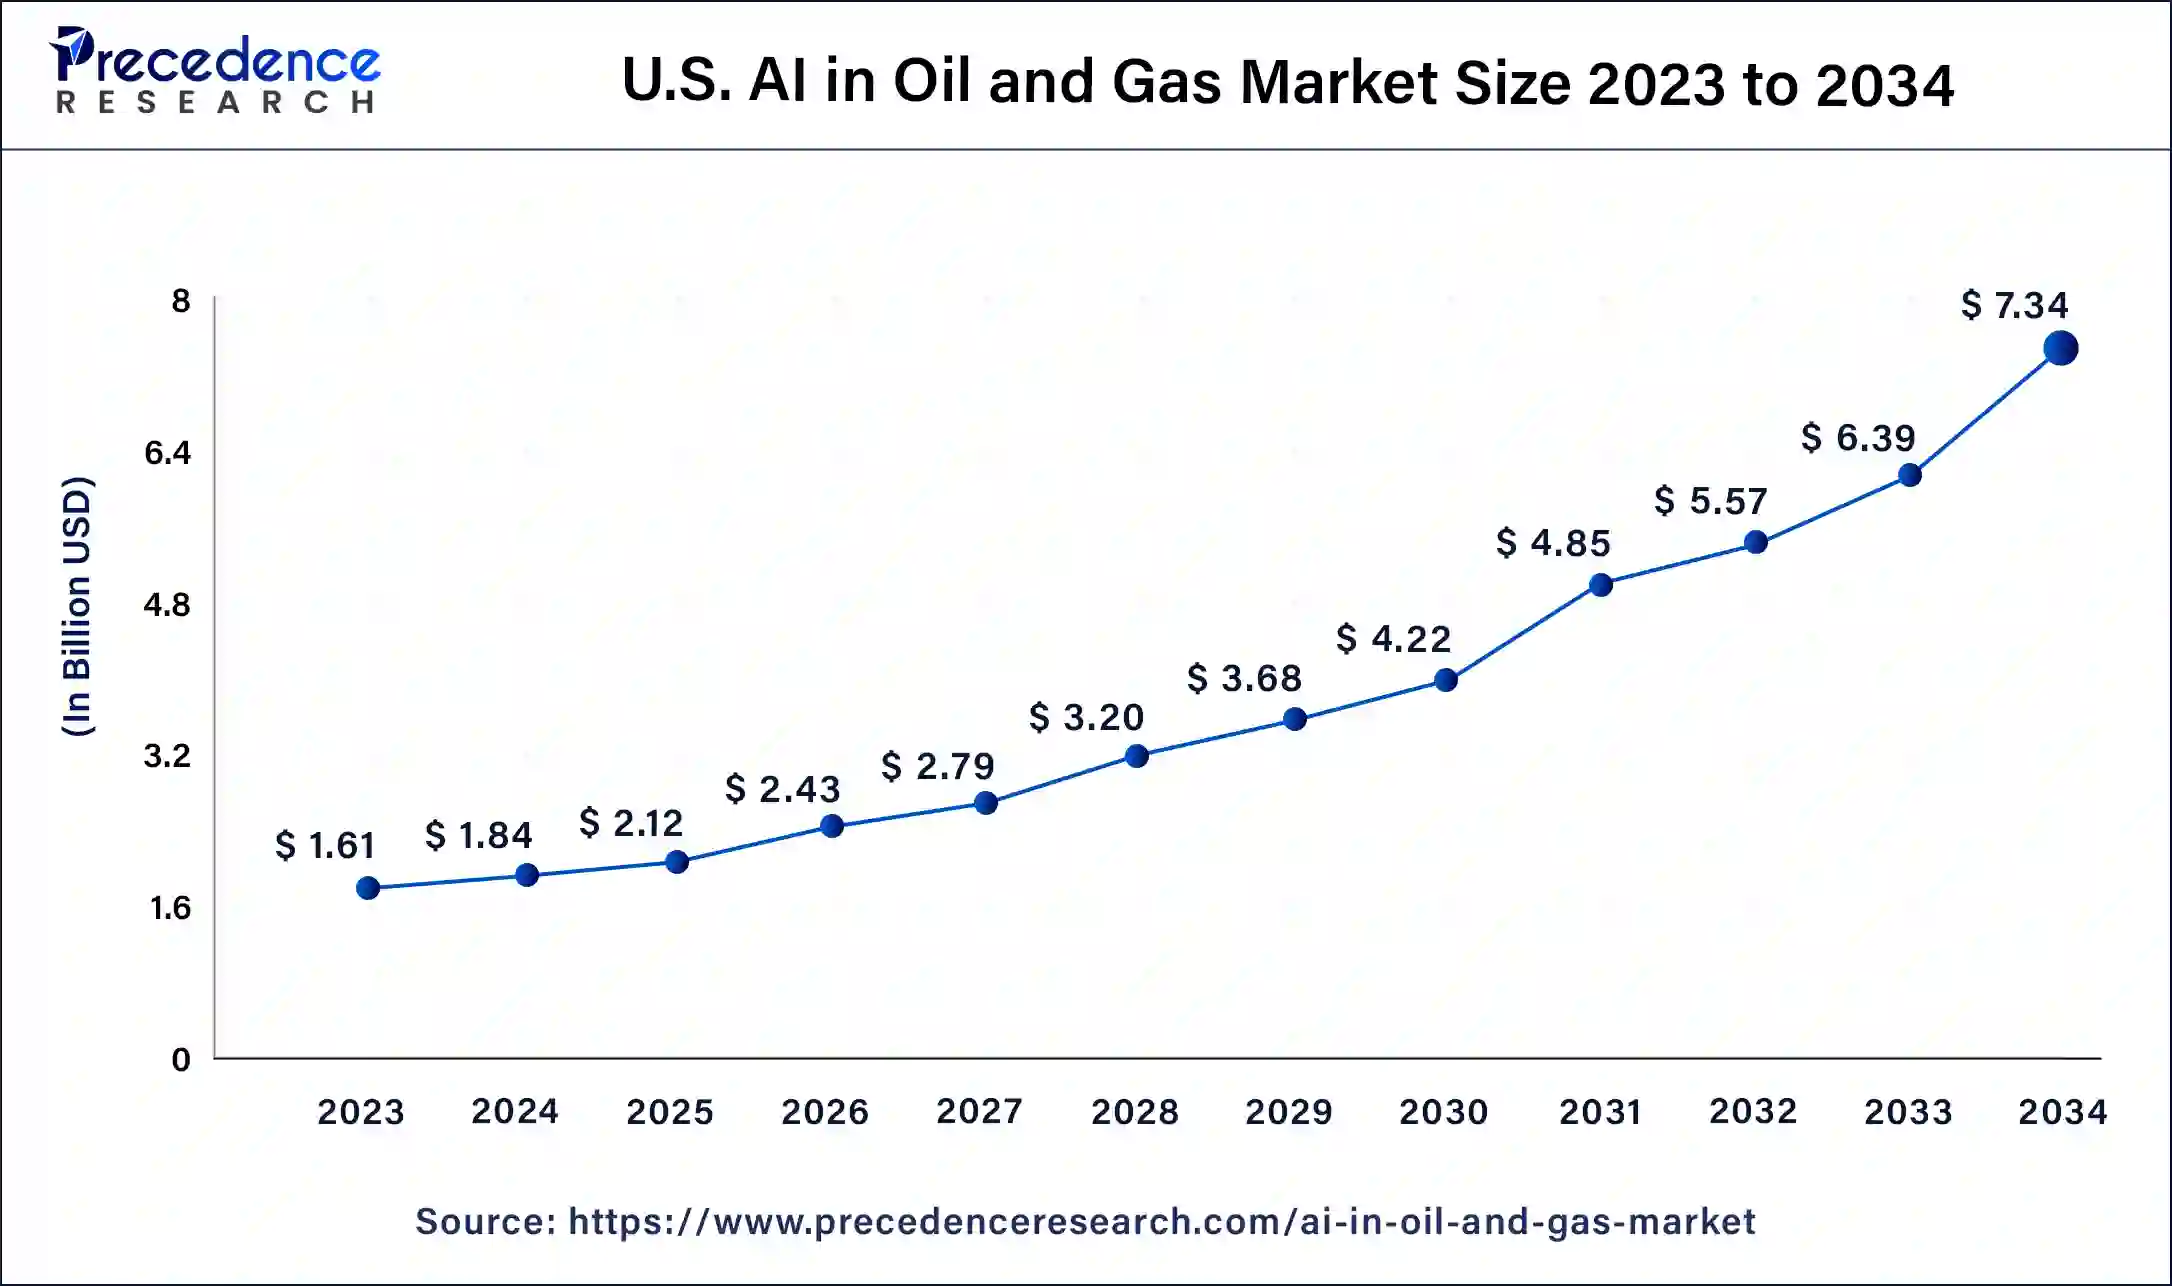 U.S. Artificial Intelligence (AI) in Oil and Gas Market Size 2024 to 2034